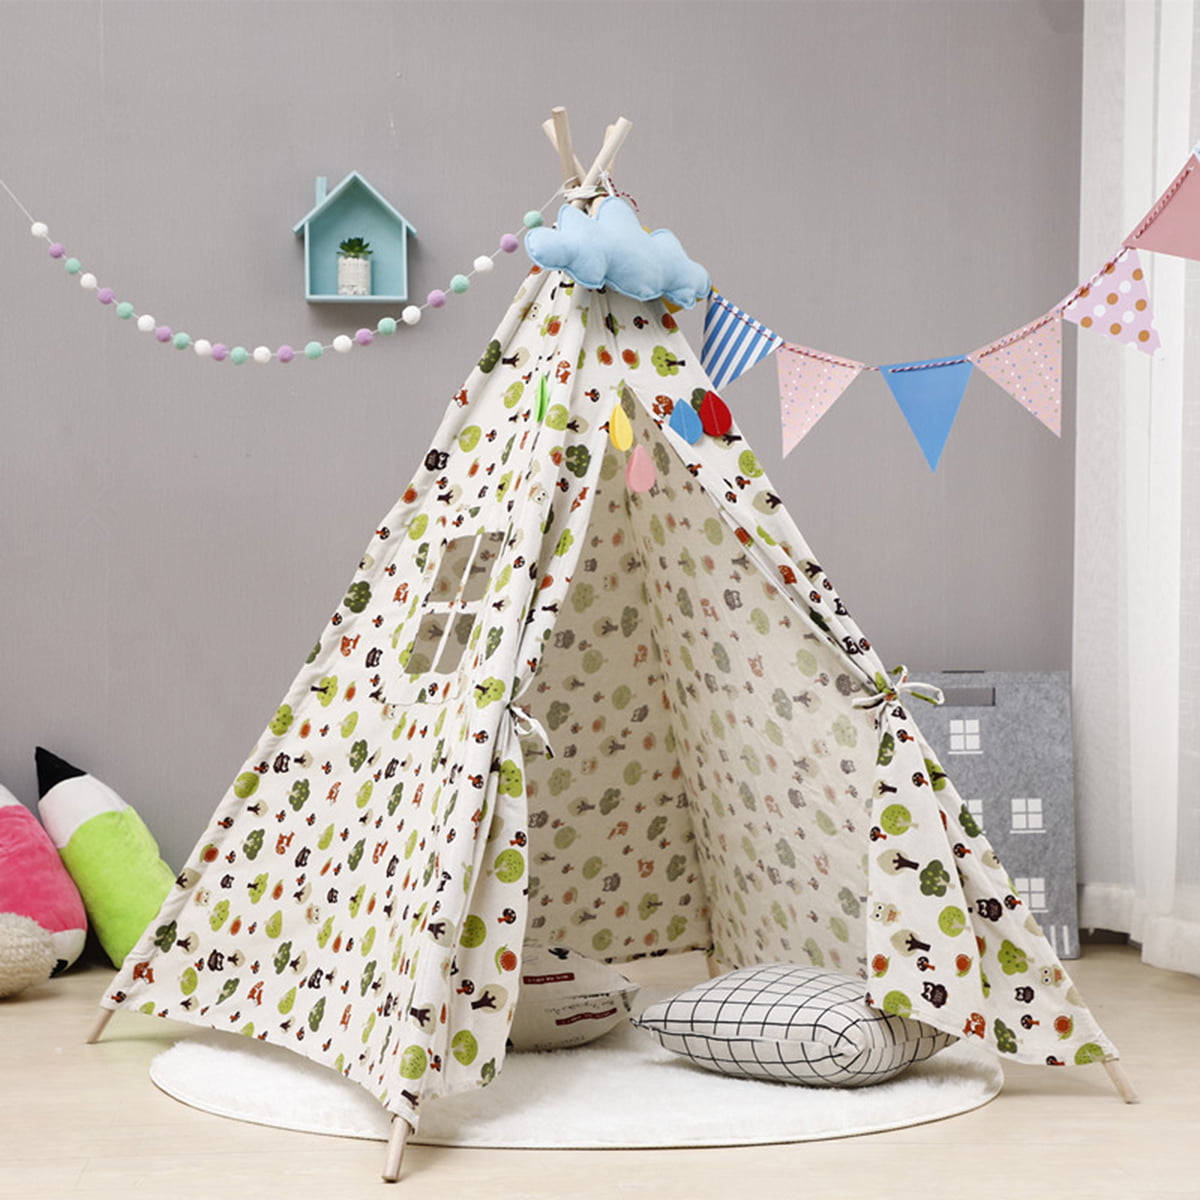 Indoor Indian Playhouse Toy Teepee Play Tent for Kids Toddlers Cotton w/ Mat 35" 